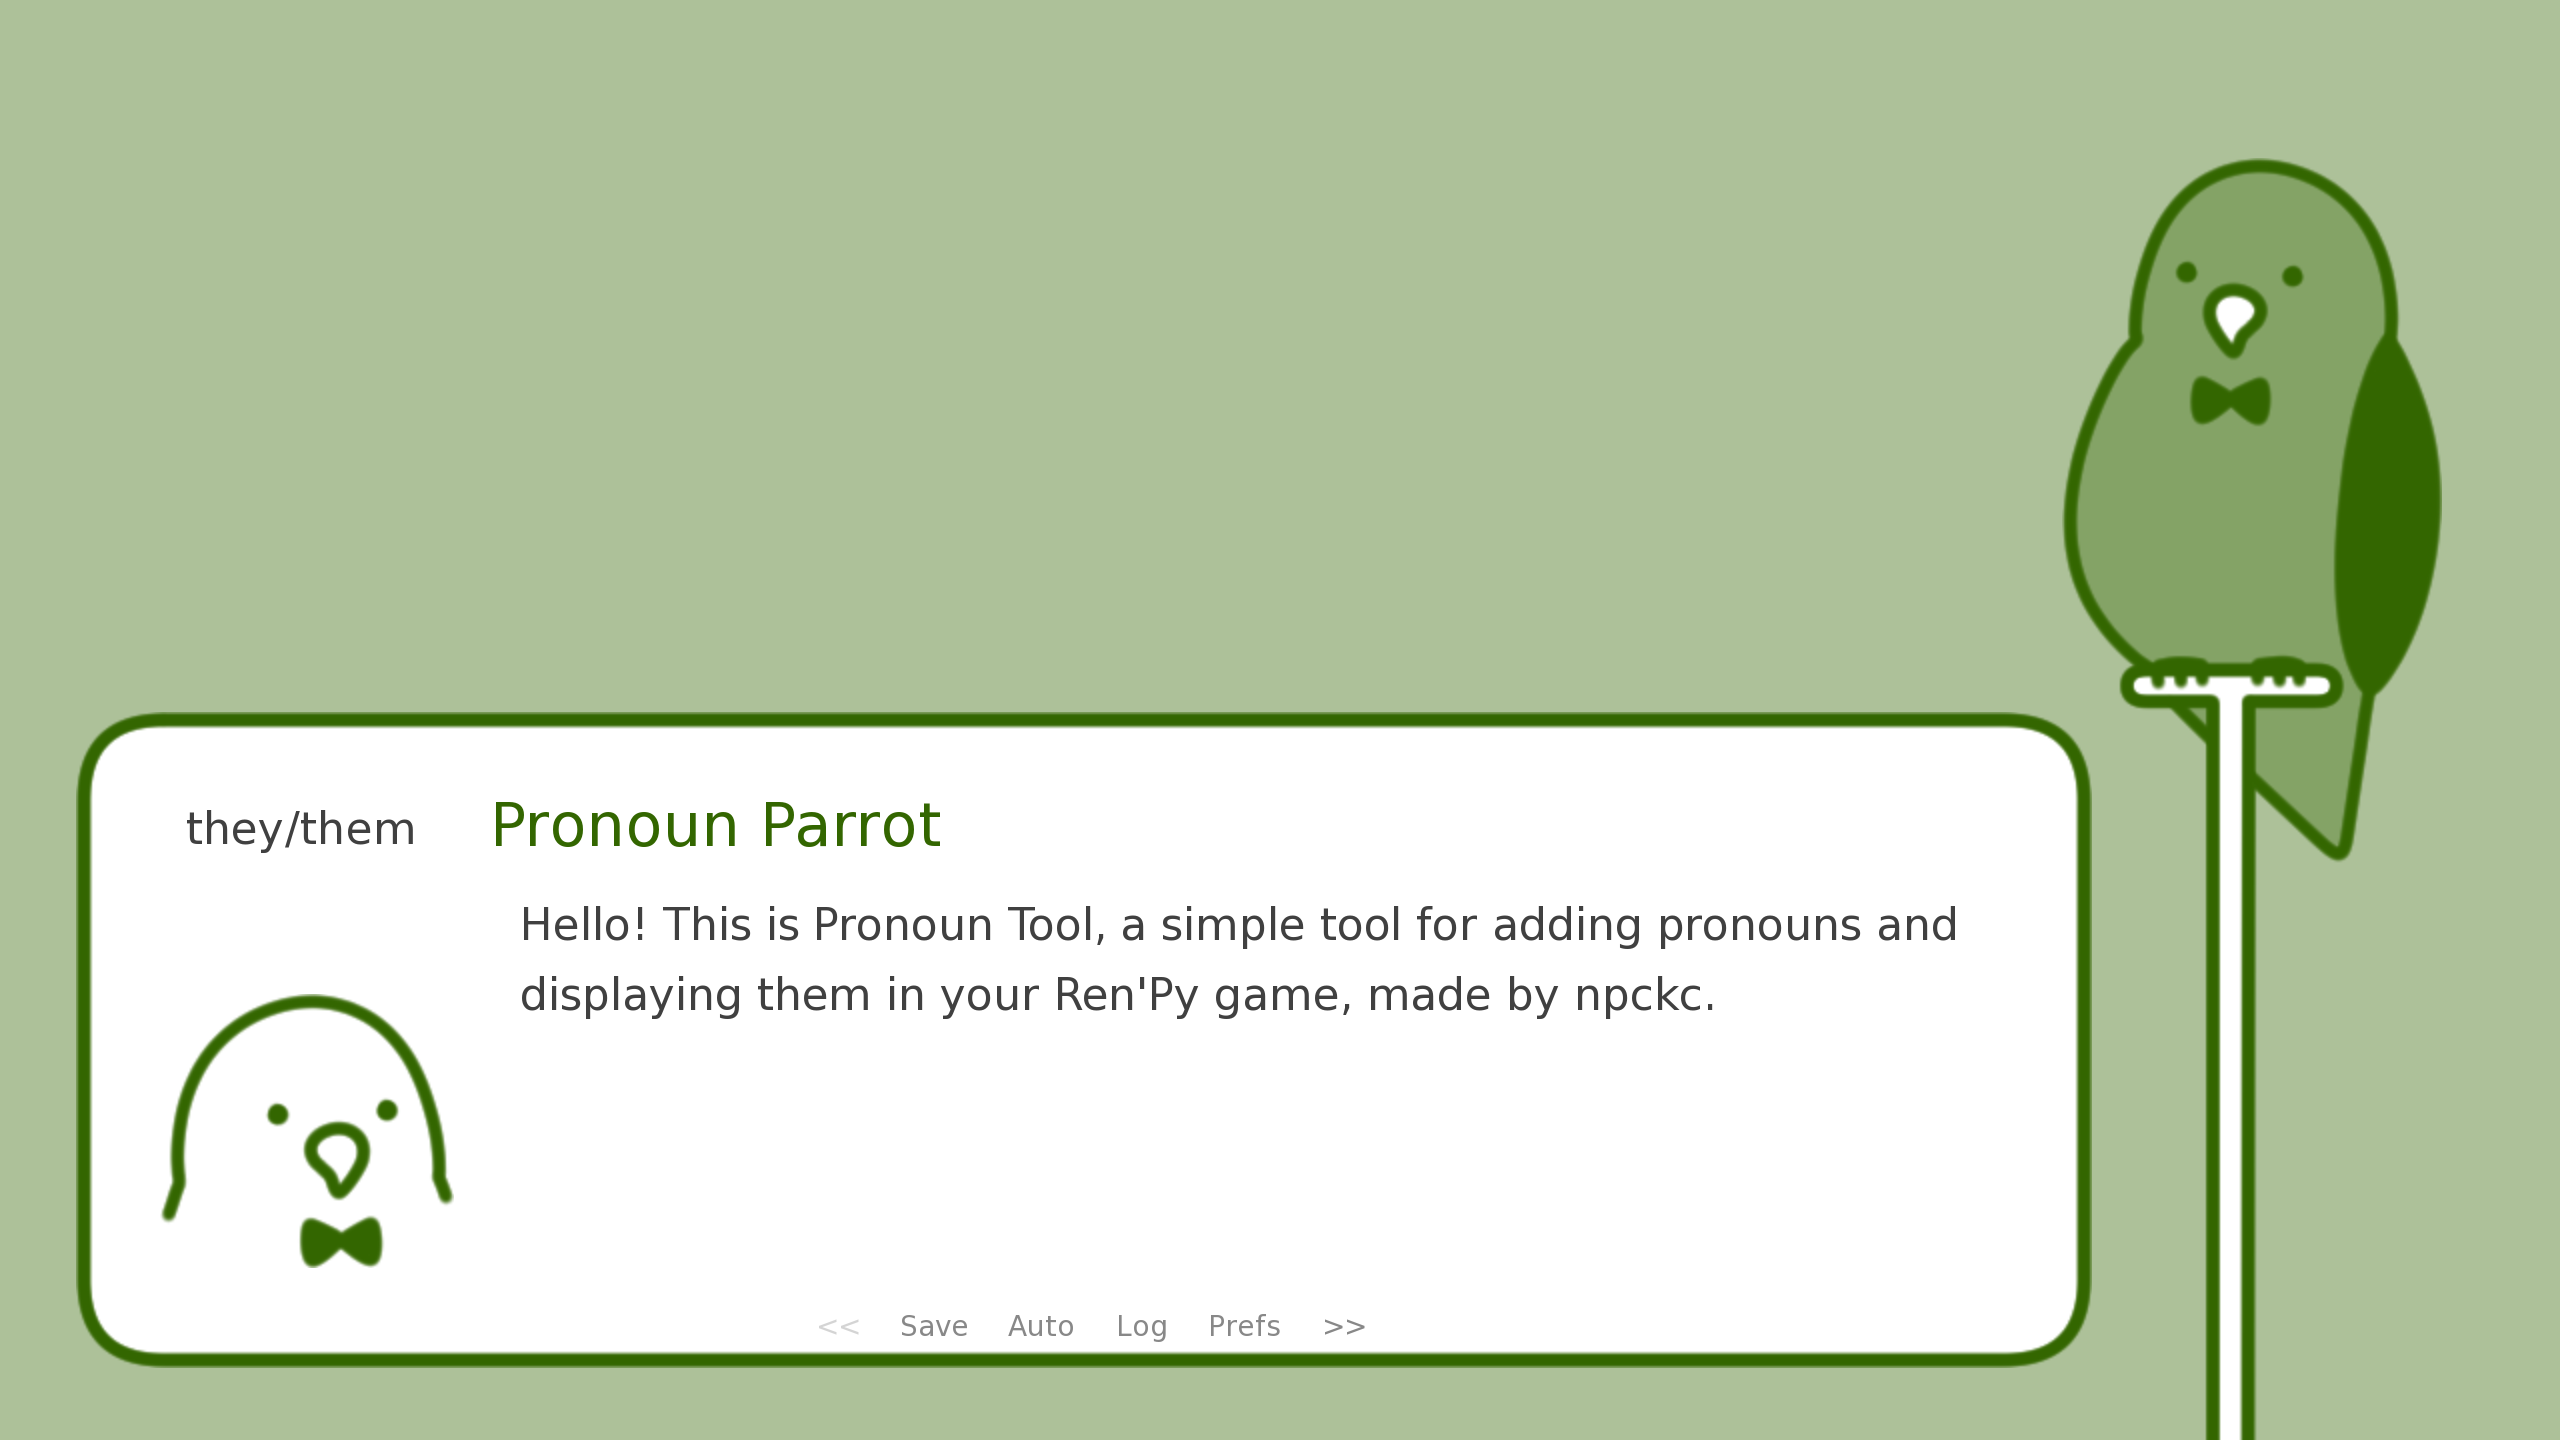 An illustrated parrot is perched against a solid, green background. A text box appears next to it, and text under the name, "Pronoun Parrot", reads, "Hello! This is Pronoun Tool, a simple tool for adding pronouns displaying them in your Ren'Py game, made by npckc.